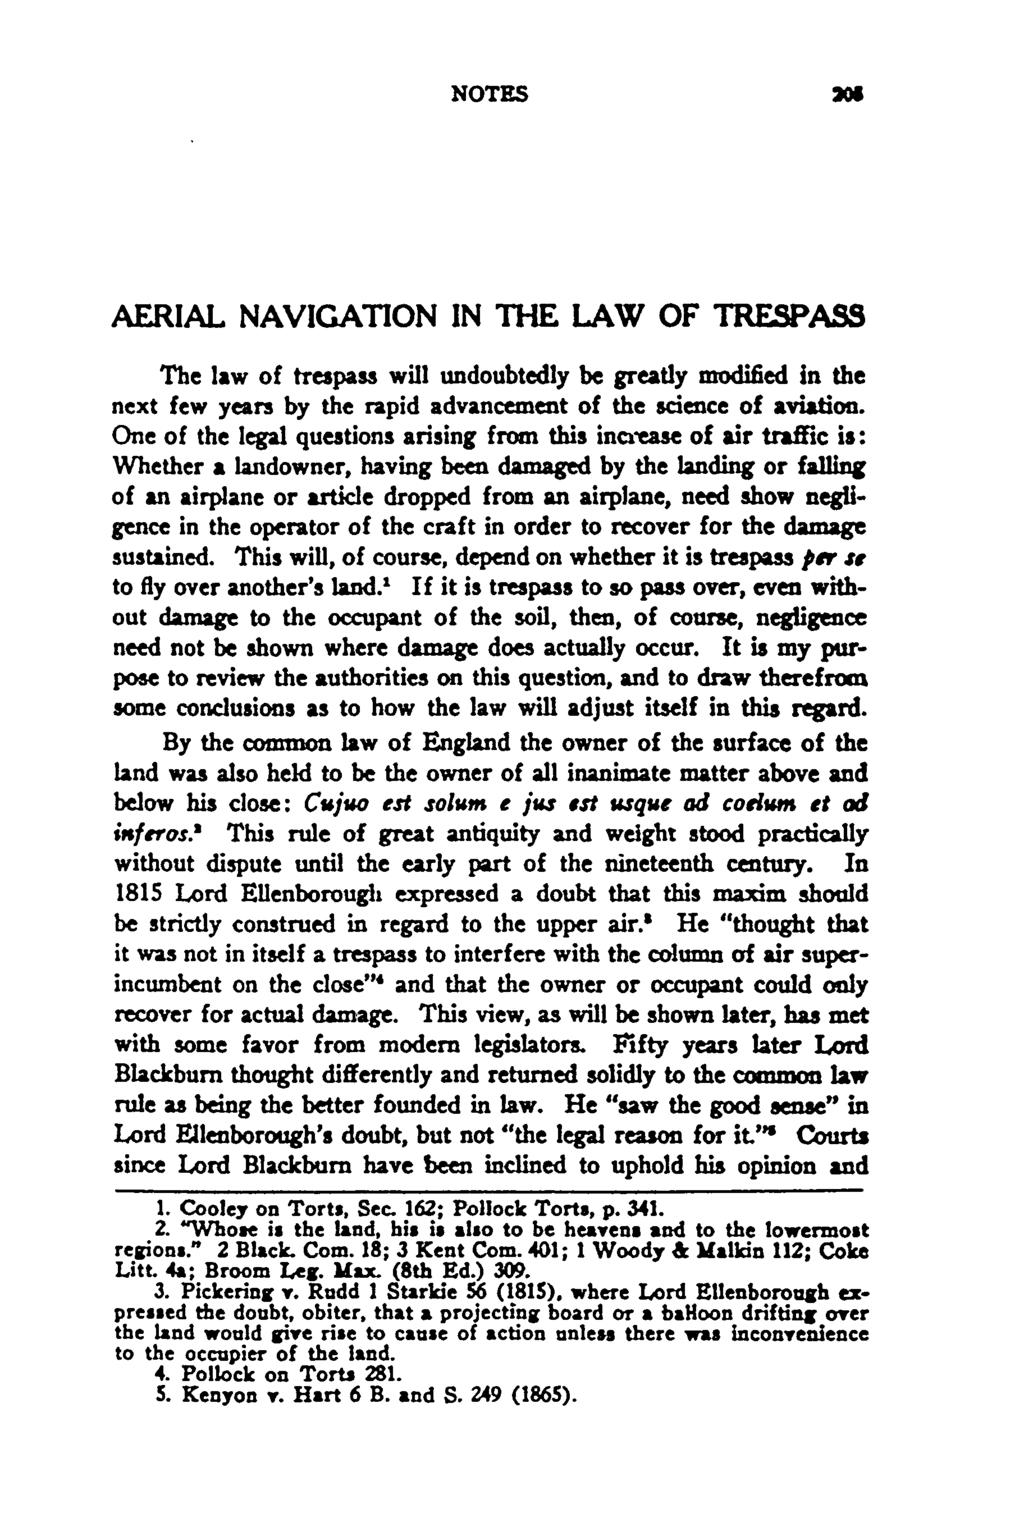 NOTES AERIAL NAVIGATION IN THE LAW OF TRESPASS The law of trespass will undoubtedly be greatly modified in the next few years by the rapid advancement of the science of aviation.